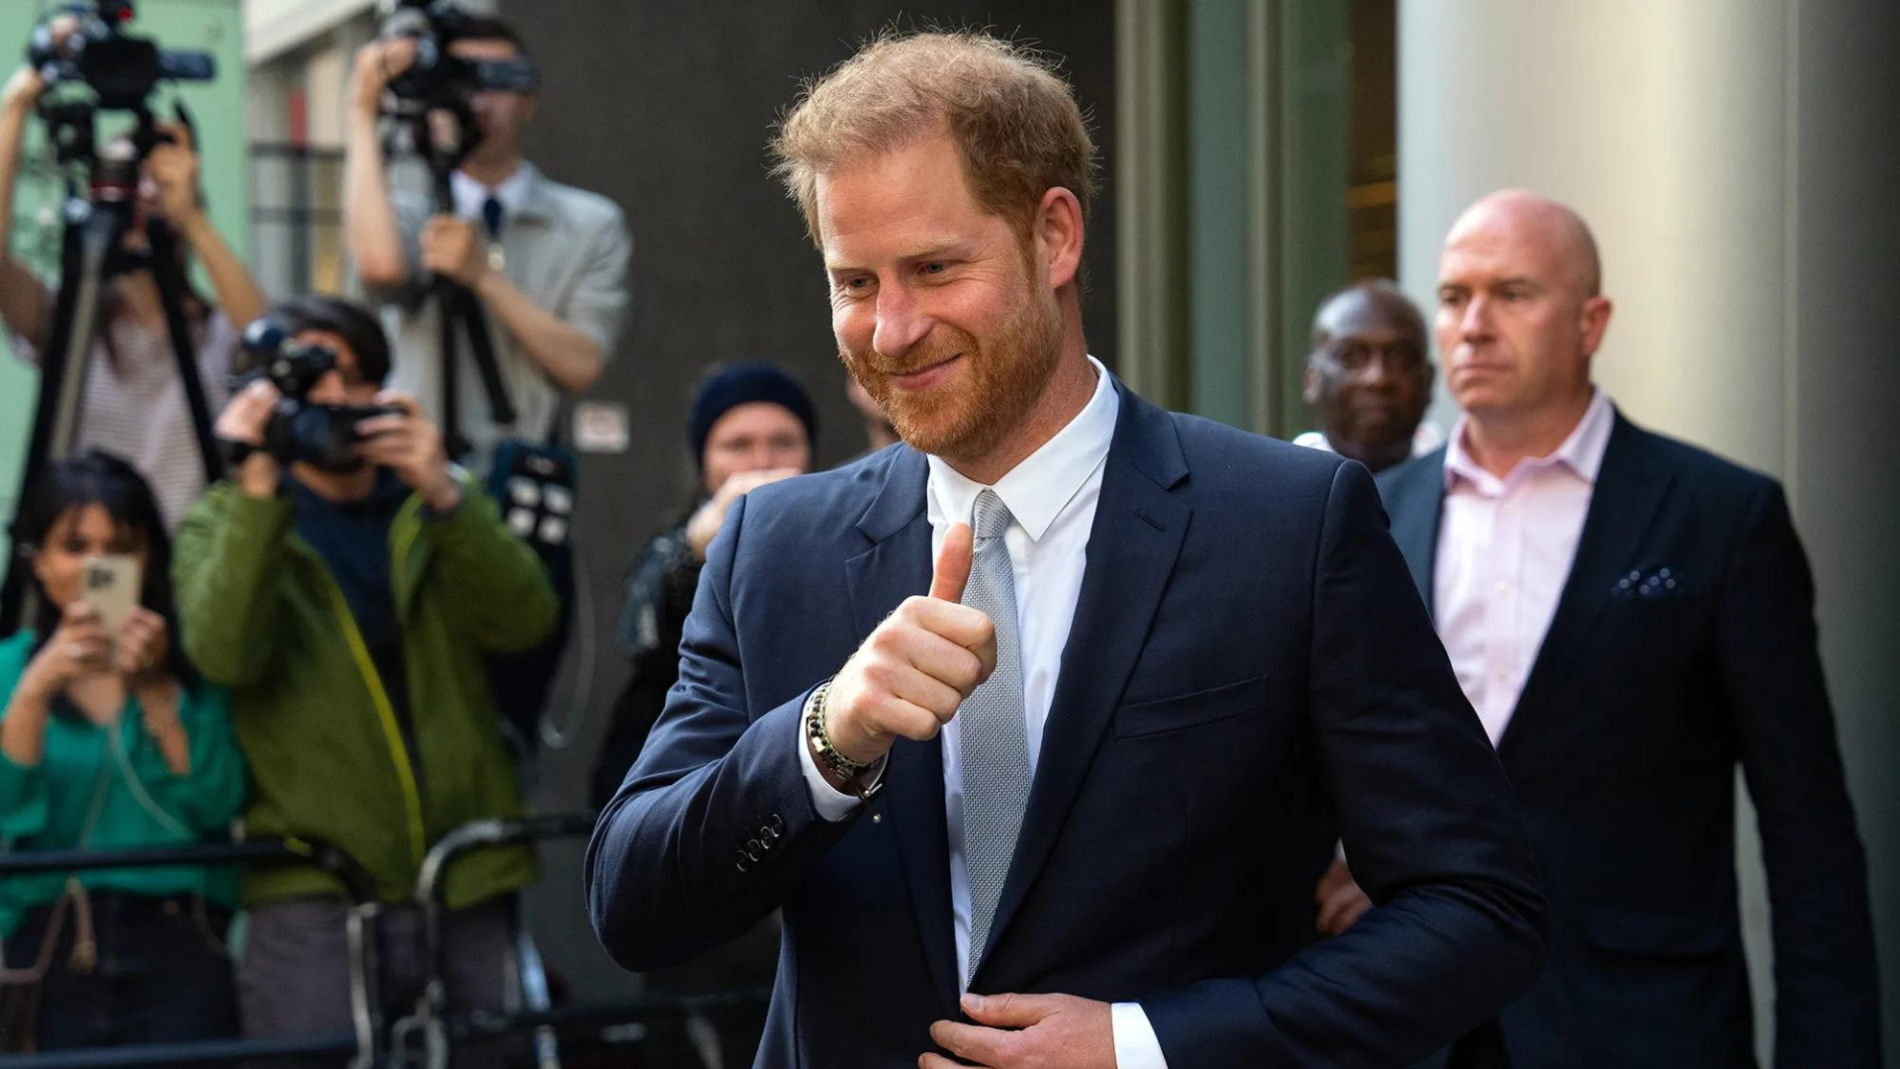 Prince Harry in a suit with a slight smile making a fist pump gesture as photographers capture the moment.